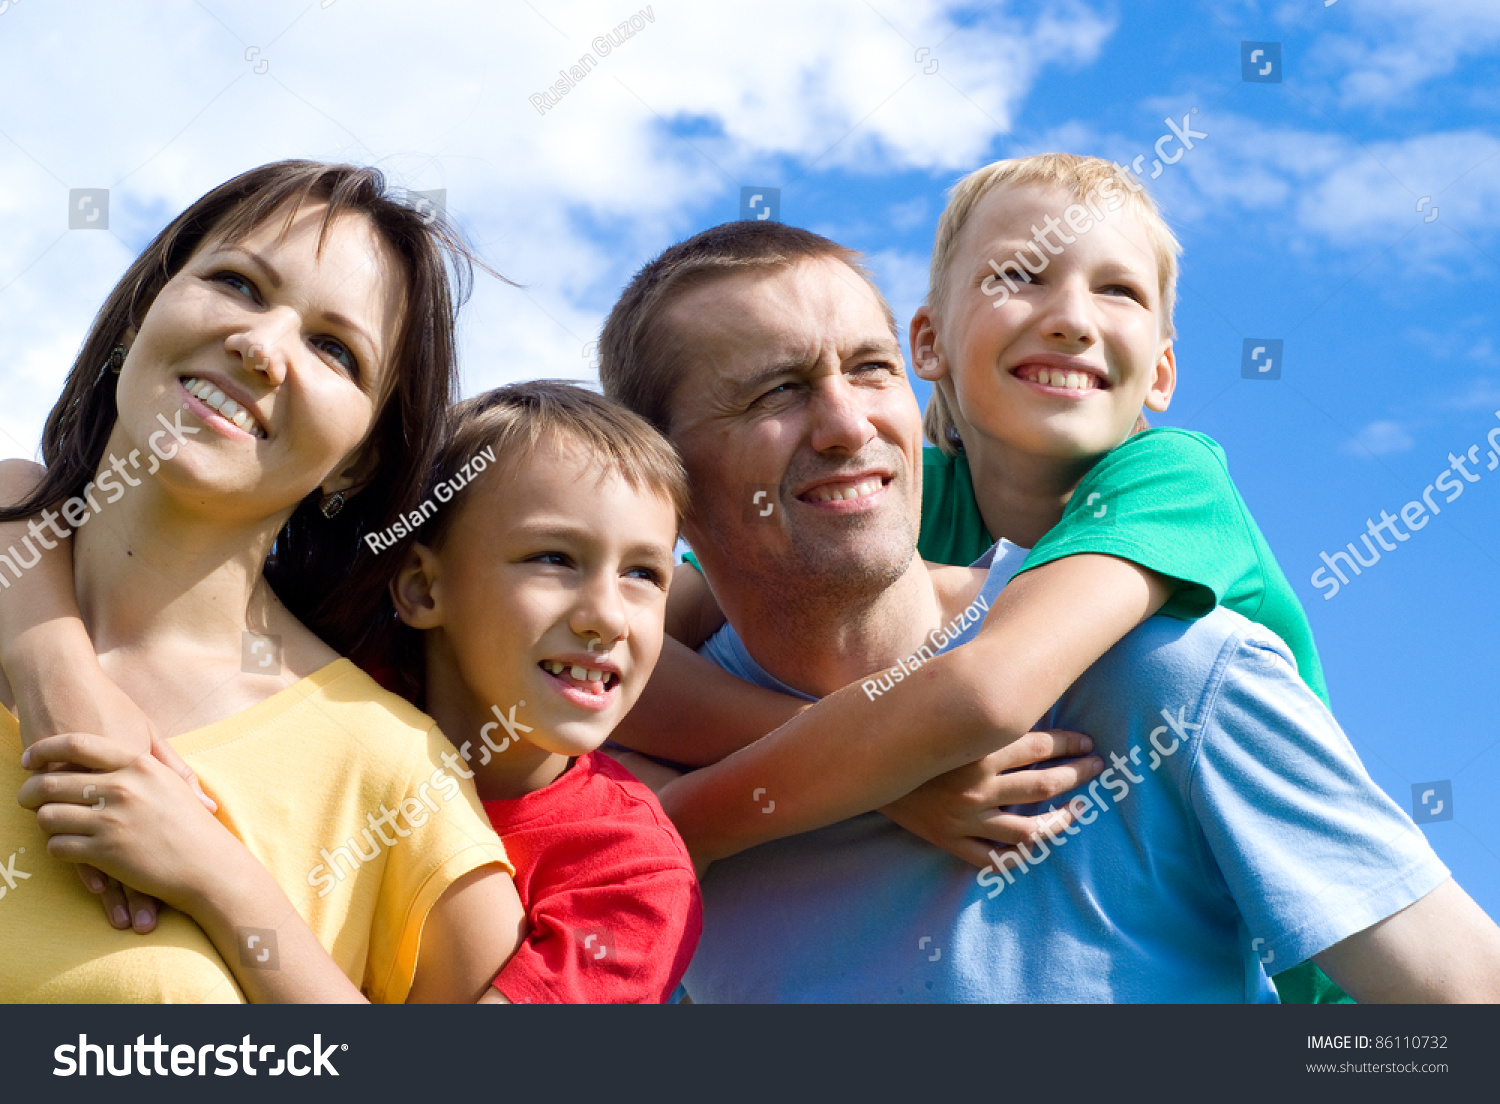 portrait of a cute family on a sky background #86110732